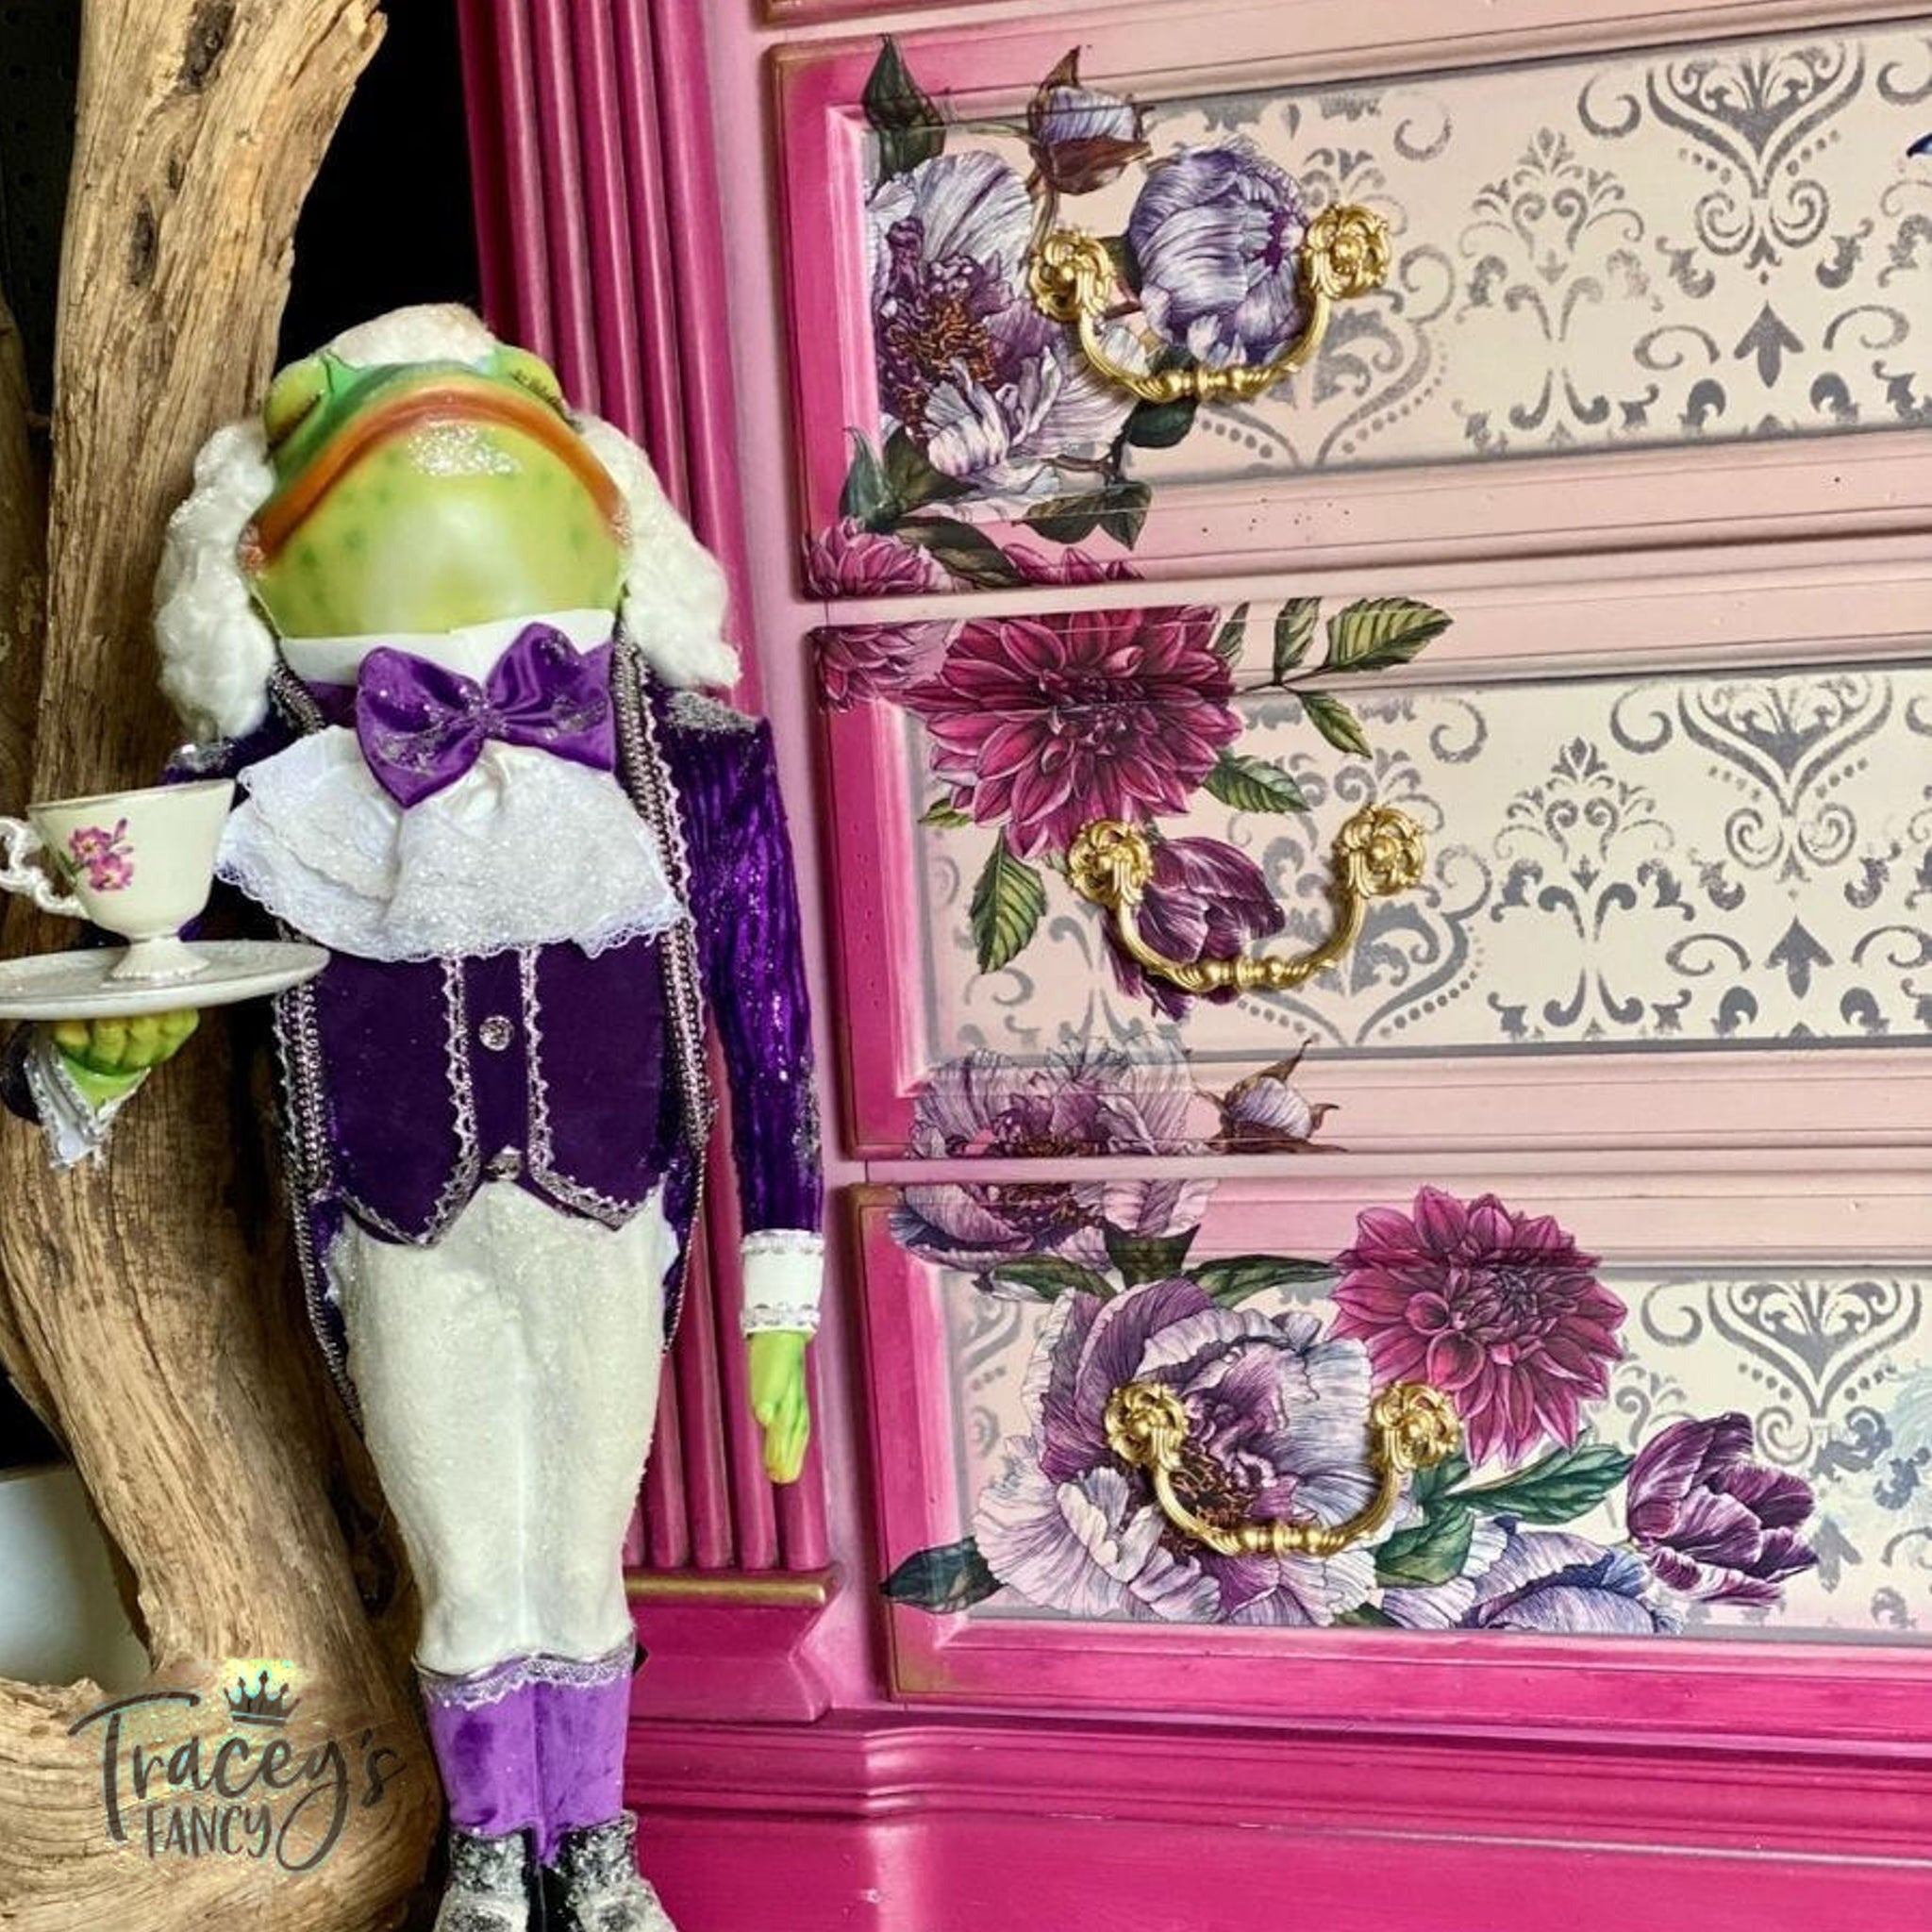 A close-up of a dresser refurbished by Trancey's Fancy is painted light and dark pink with gold accents and features the Buds and Branches transfer. A statue of a frog waiter in a white wig and purple coat and vest stands next to the dresser.